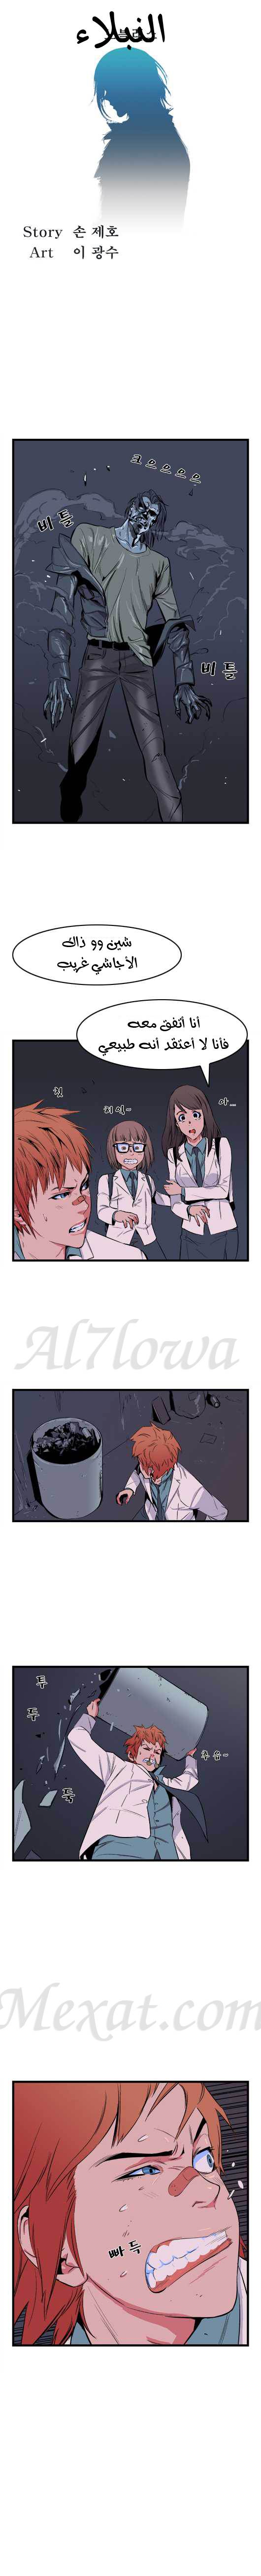 Noblesse: Chapter 15 - Page 1